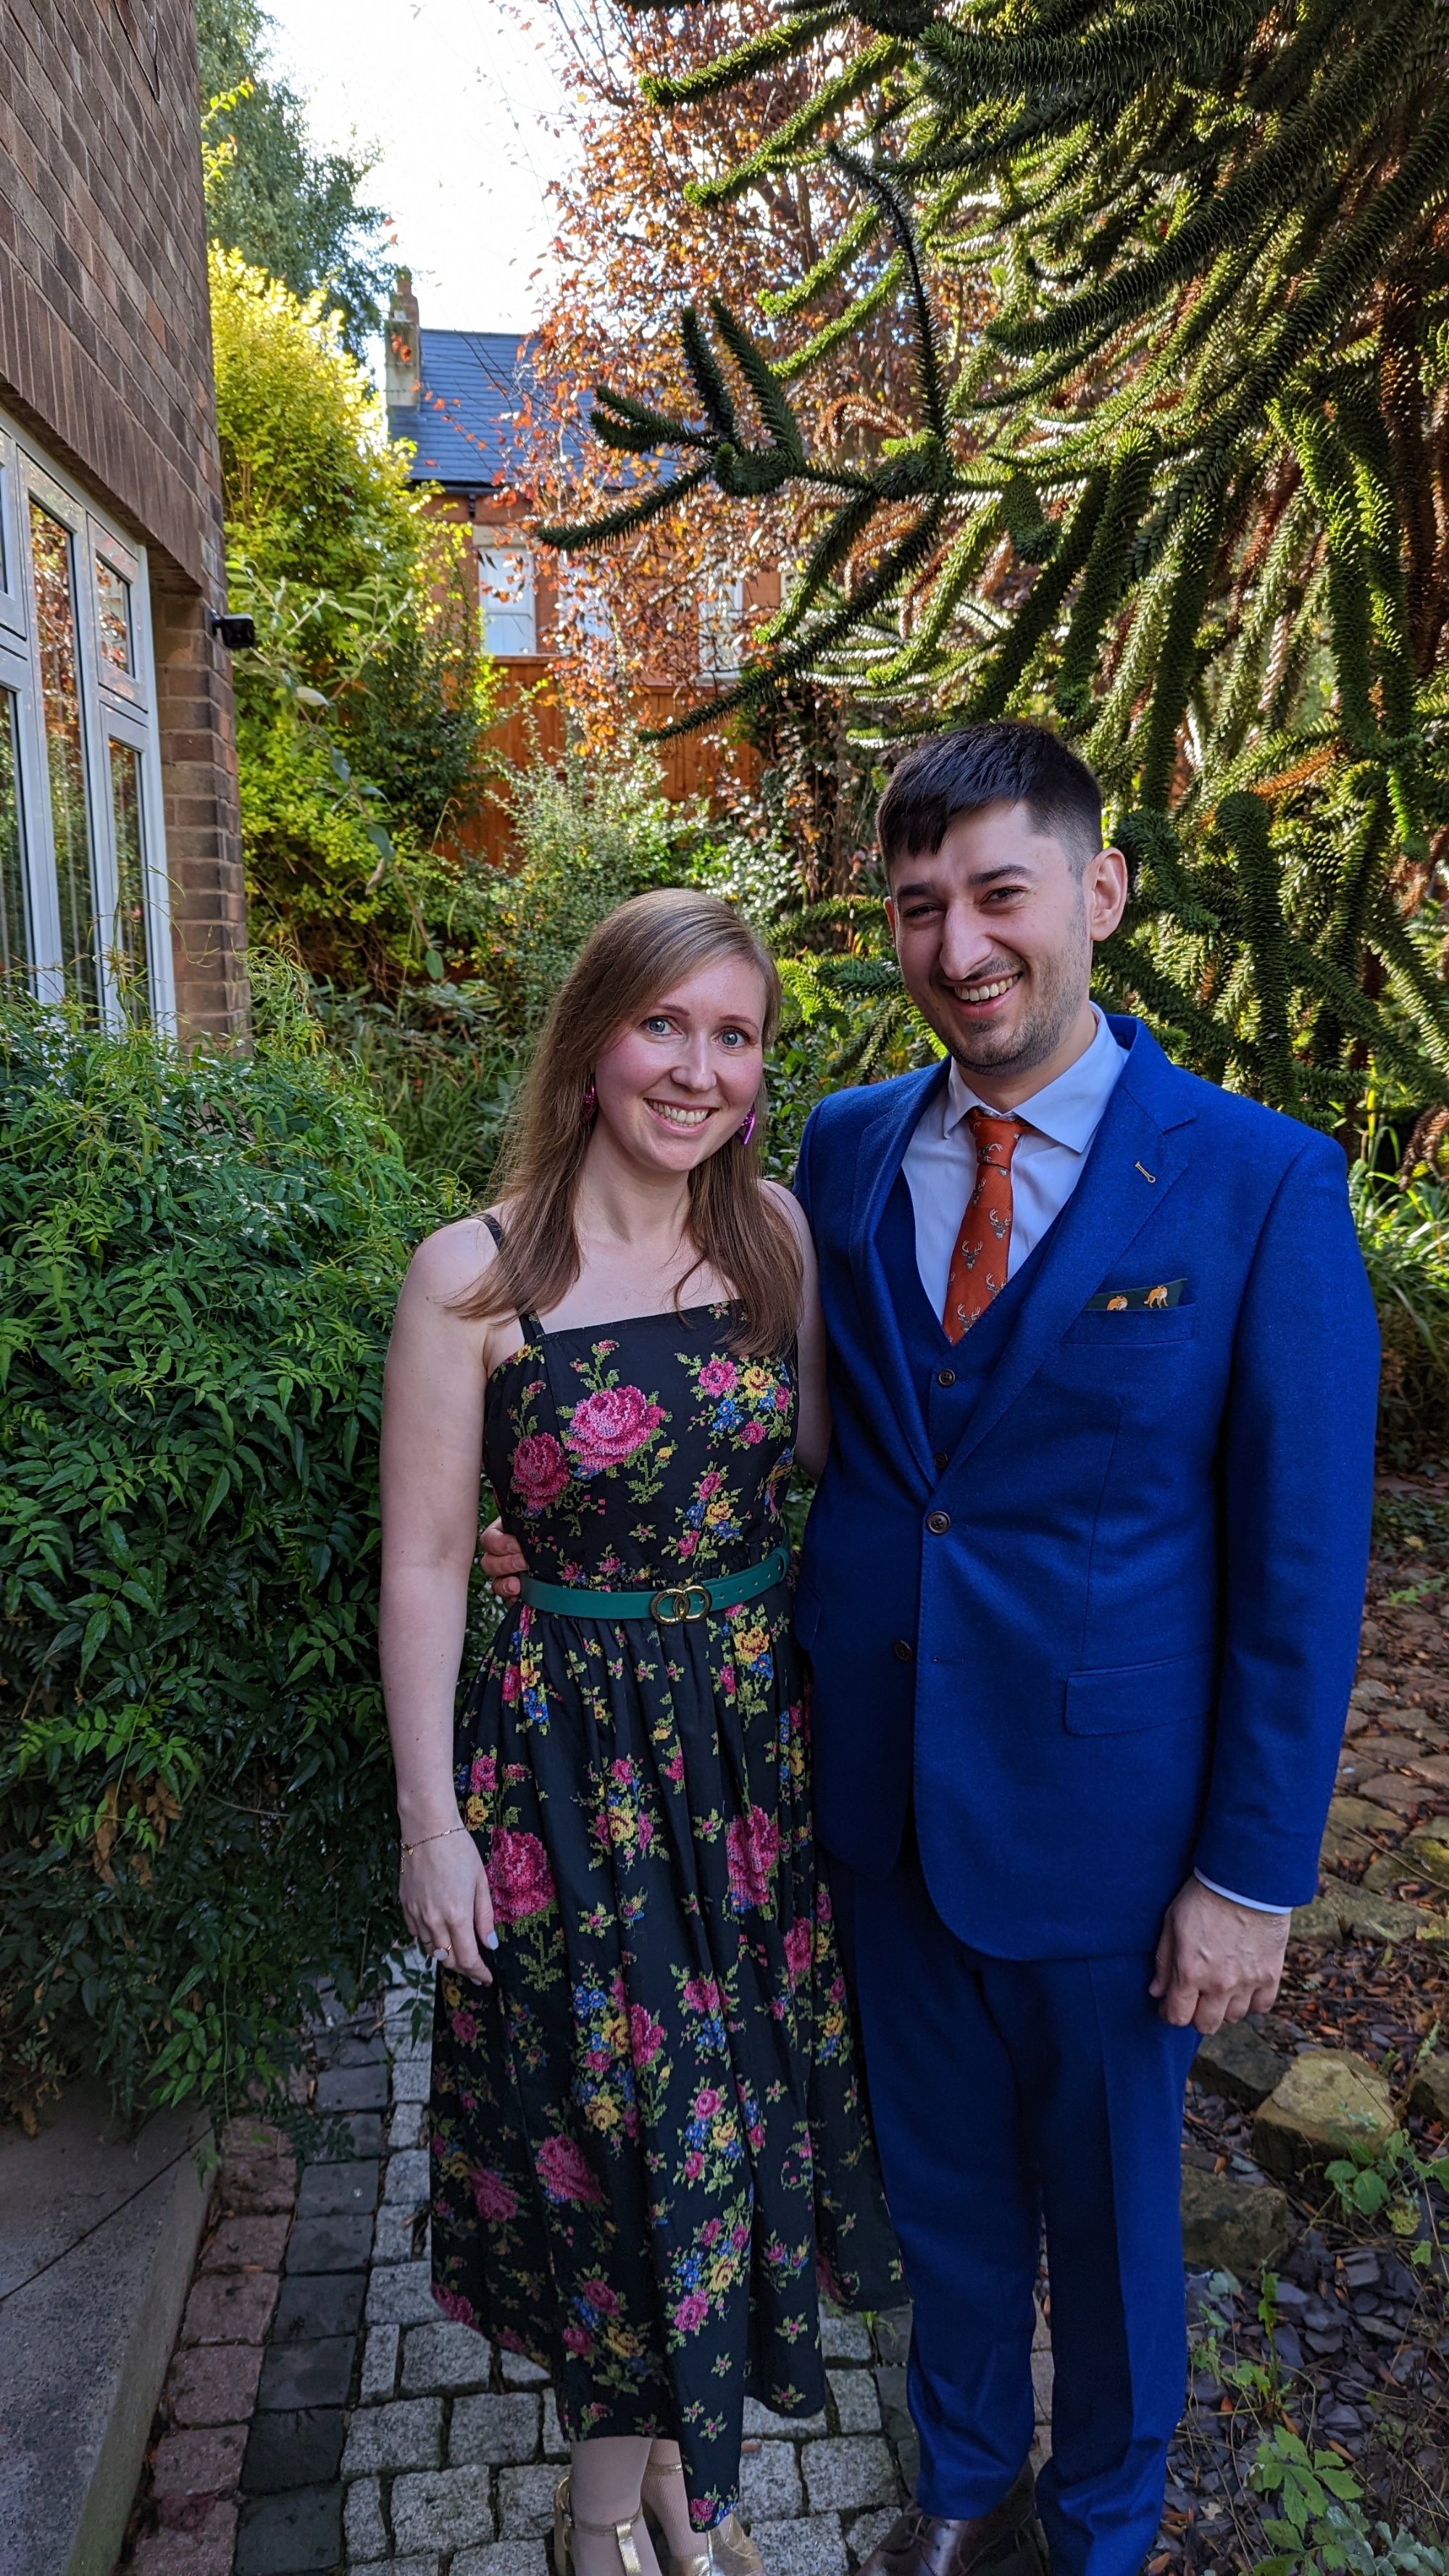 Anna and Jamie standing outside their house, ahead of their friends' wedding, looking very cute.

Anna is looking beautiful  in a flowery dress, with gold shoes. She has a pair of purple heart earrings 

Jamie is in a custom made blue suit, from Black Butterfly in Nottingham, with brown shoes and mustard socks (not pictured), a bronze tie with stags on it, and a green pocket square with foxes on it.

Behind them you can see their monkey puzzle tree.